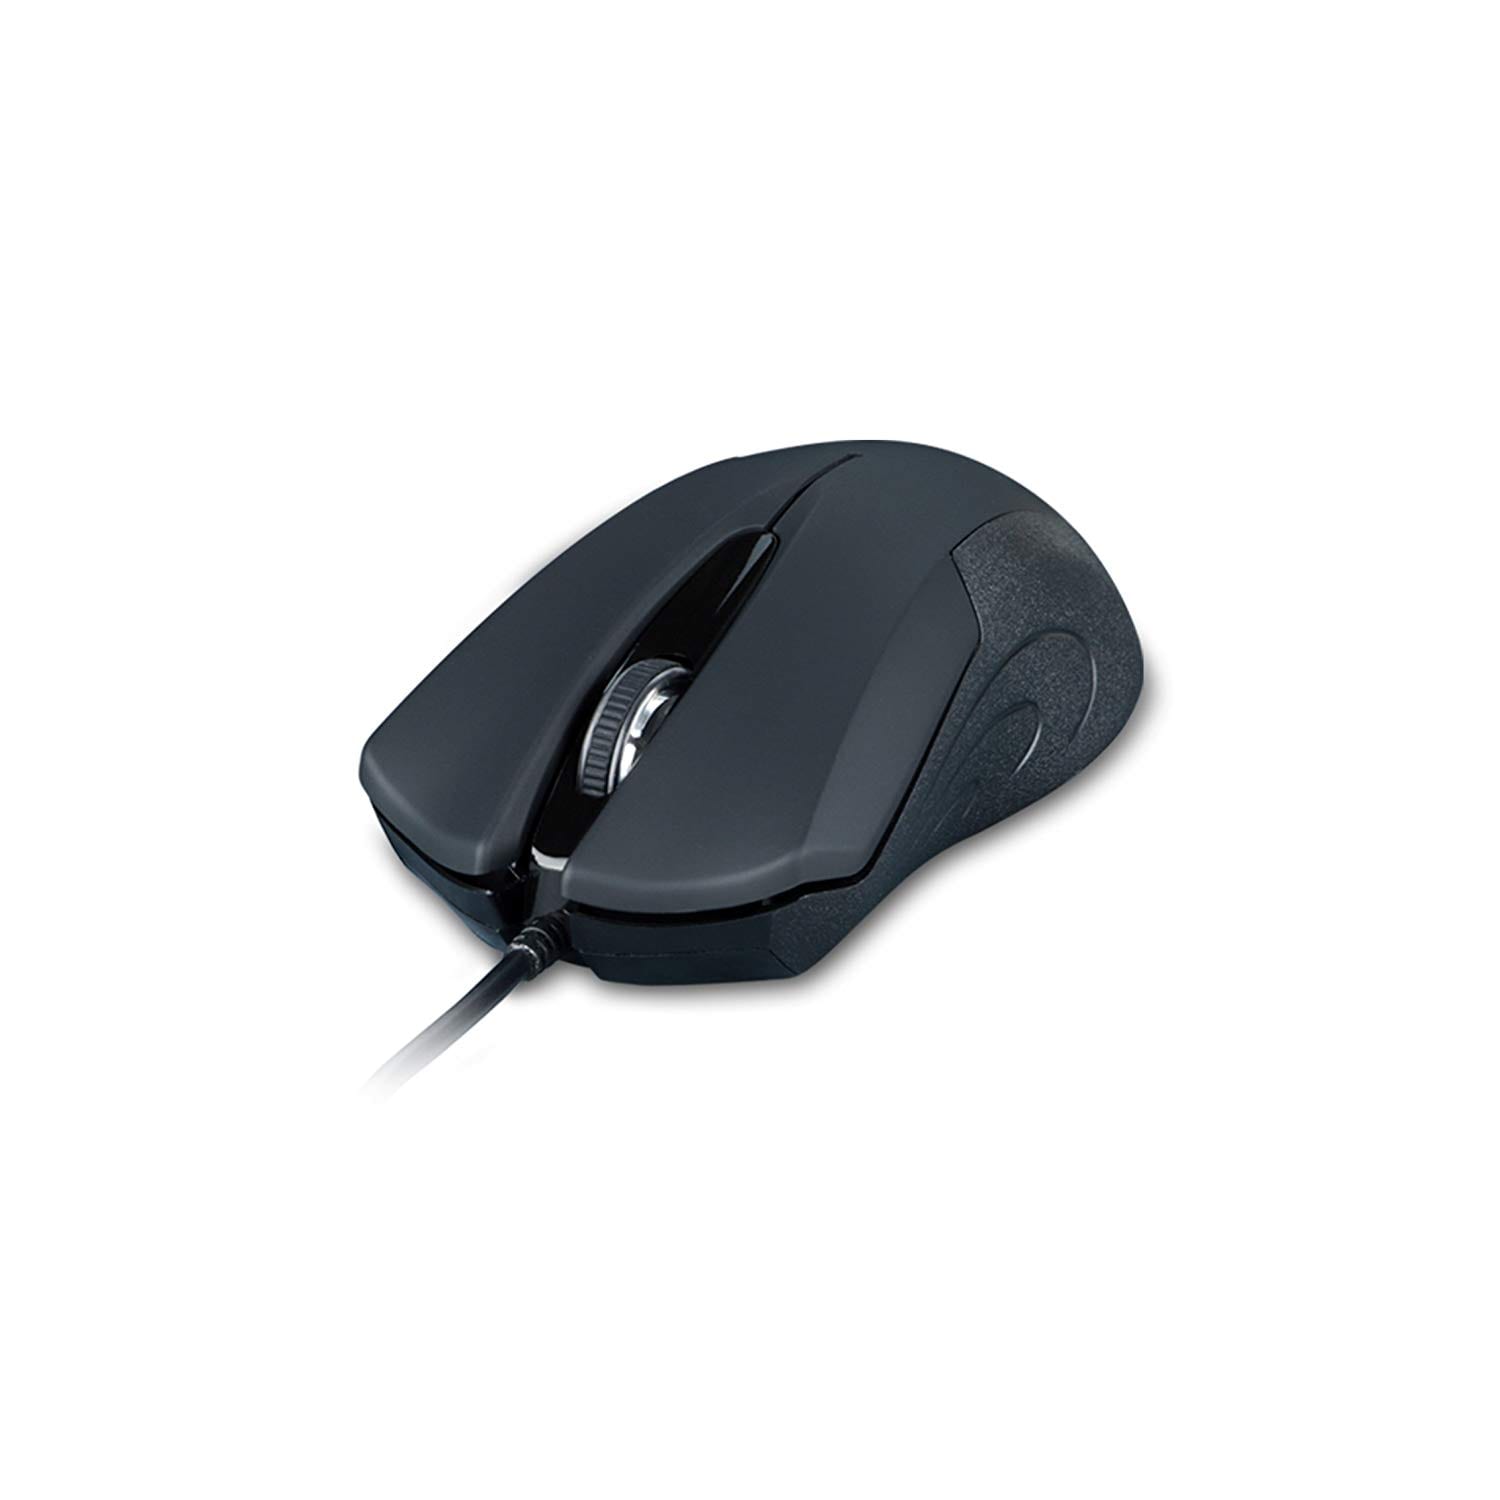 GoFreetech Wired 1000DPI Mouse - Black